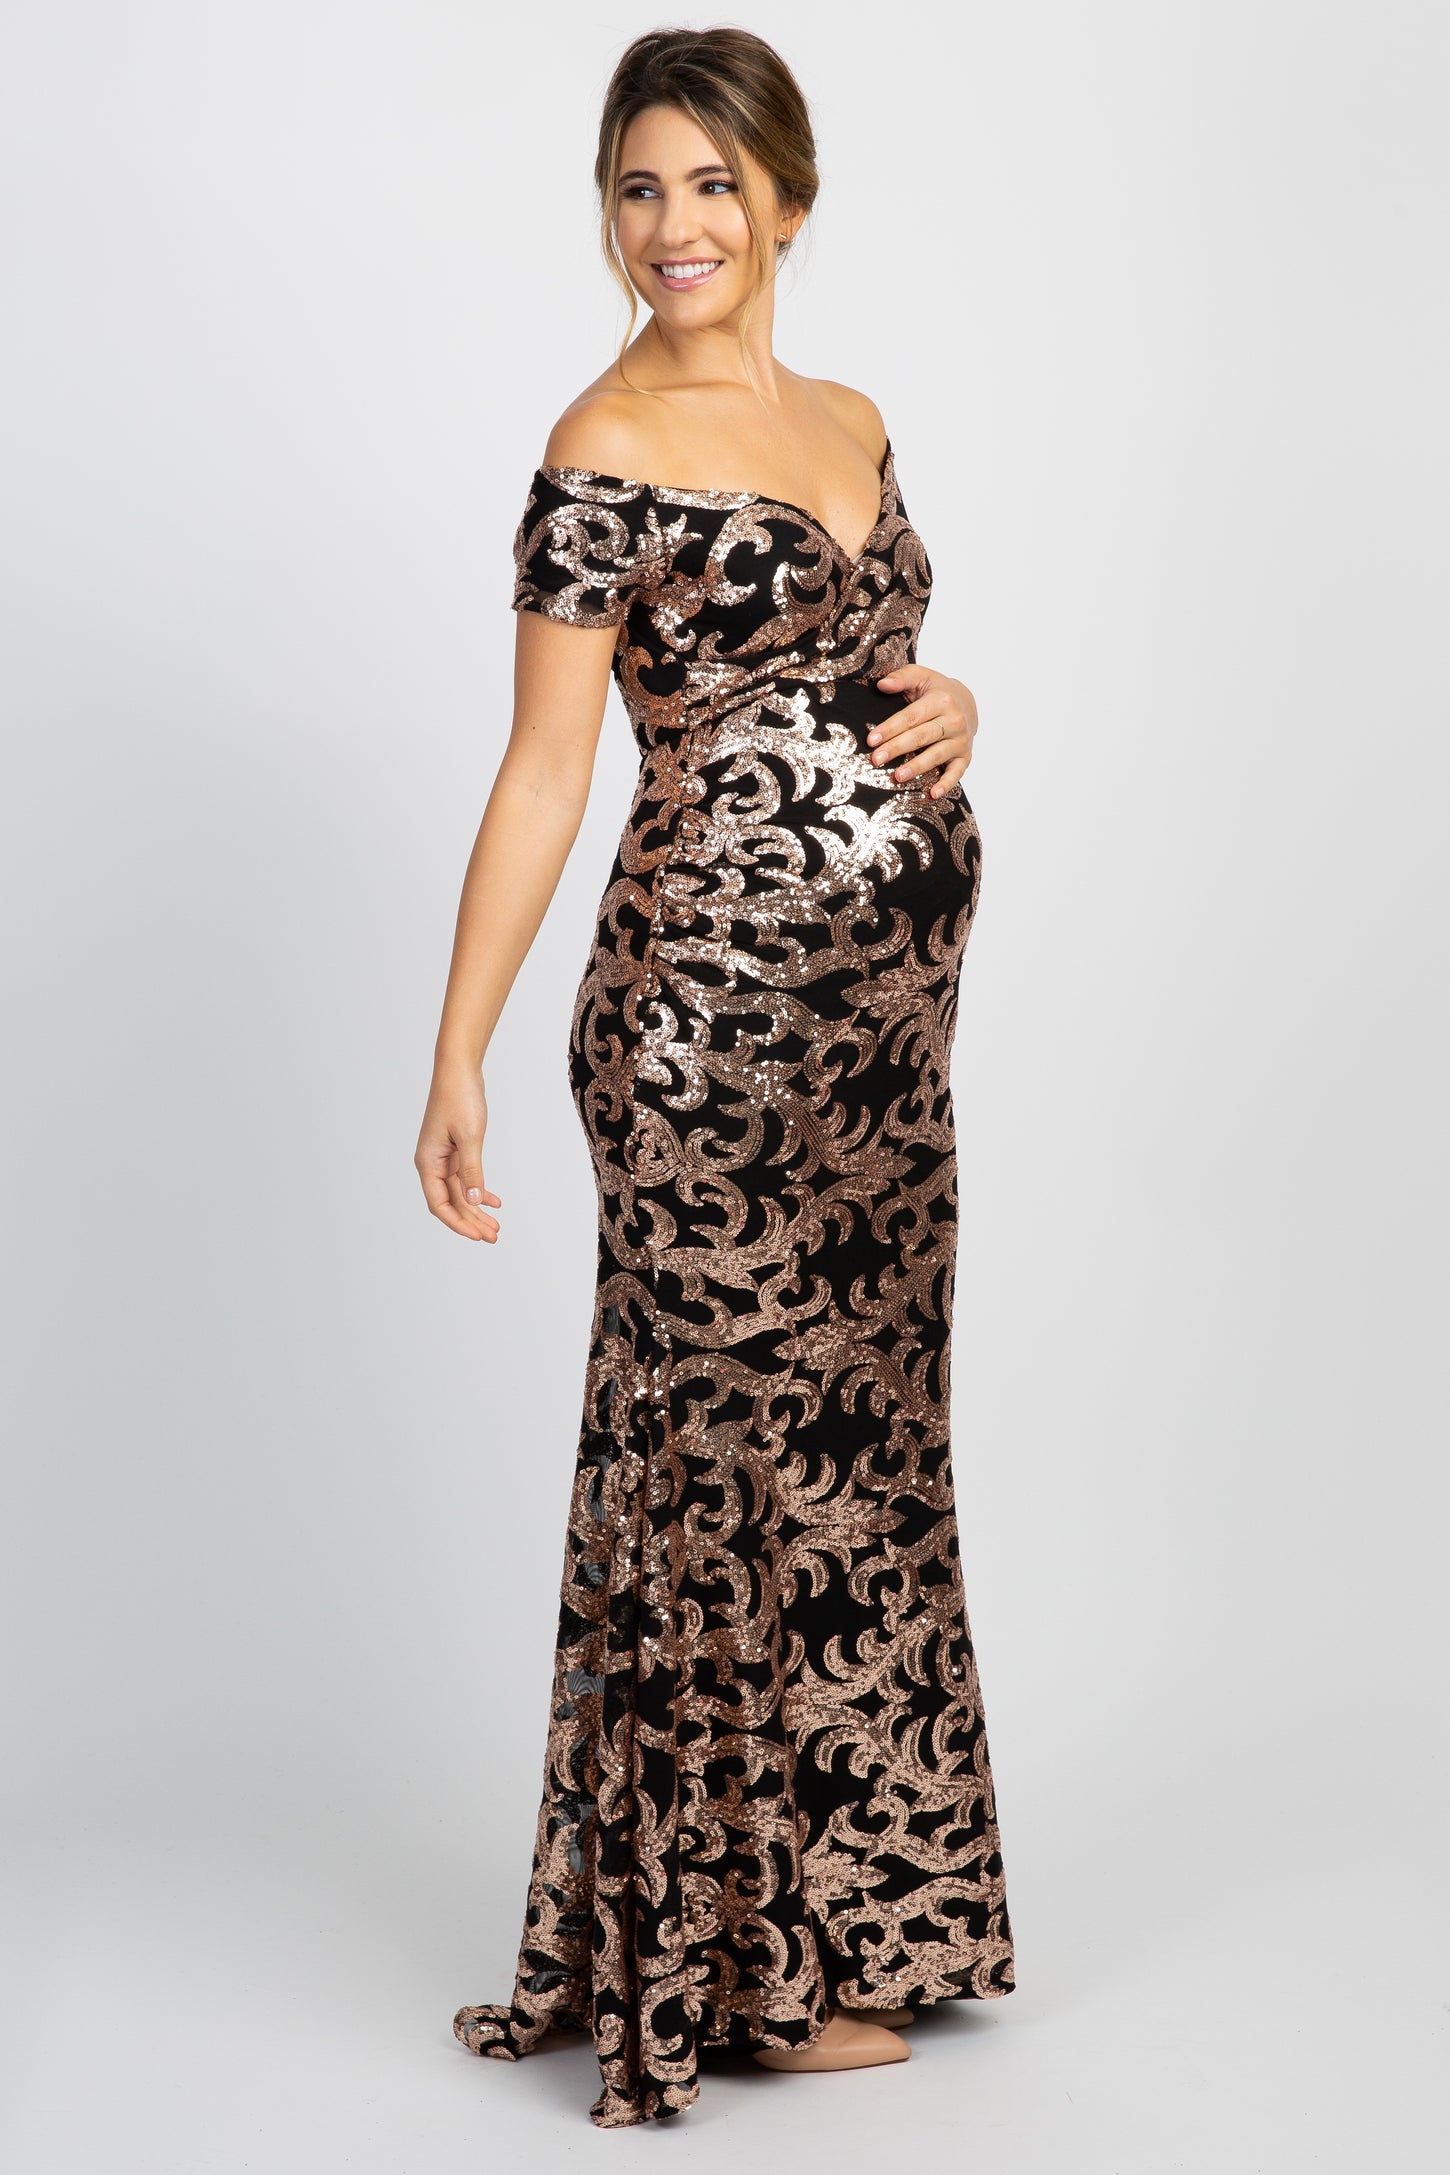 PinkBlush Black Sequin Off Shoulder Wrap Maternity Photoshoot Gown/Dress